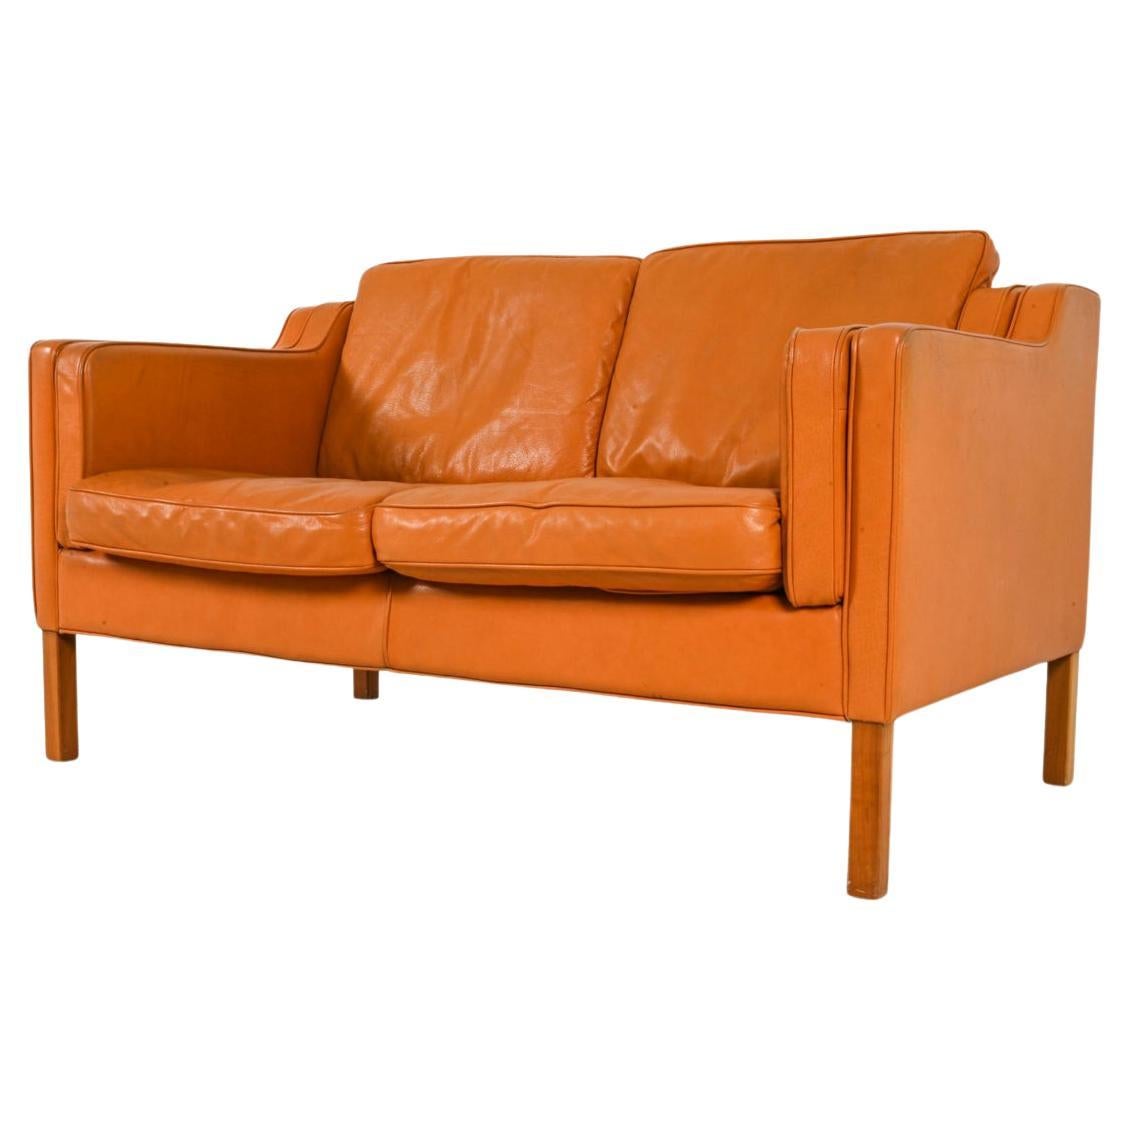 Midcentury Danish modern beautiful butterscotch leather 2 seat sofa birch legs. Style of Børge Mogensen. Beautiful butterscotch leather is buttery soft and shows little to no signs of use but broken in nicely. Cushions have original down filled